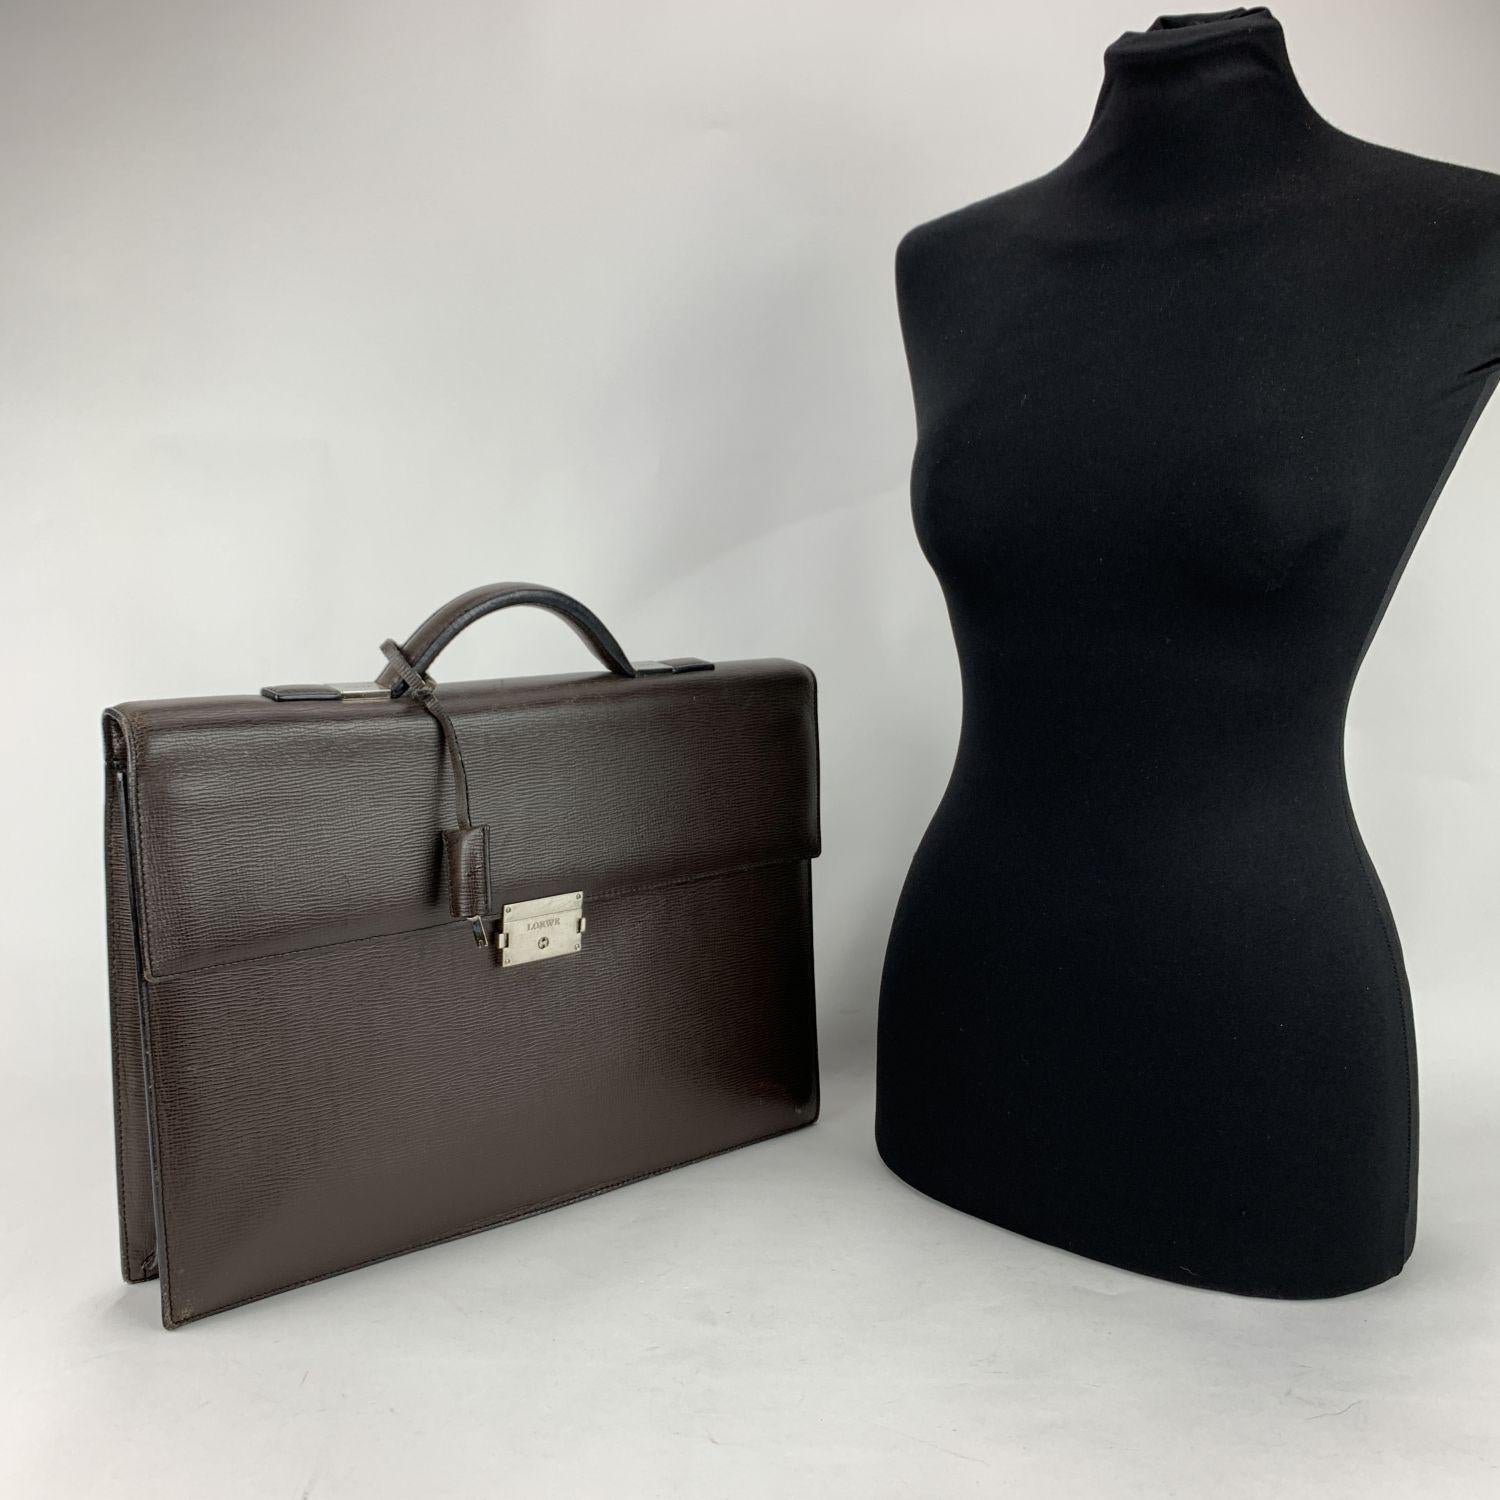 Loewe briefcase in brown textured leather. Sleek & elegant. Silver metal hardware. Single flat top handle. Flap with push lock closure with key (included). 1 flat section under the flap. 1 rear pocket. Fabric lining inside with 1 side zip pocket.